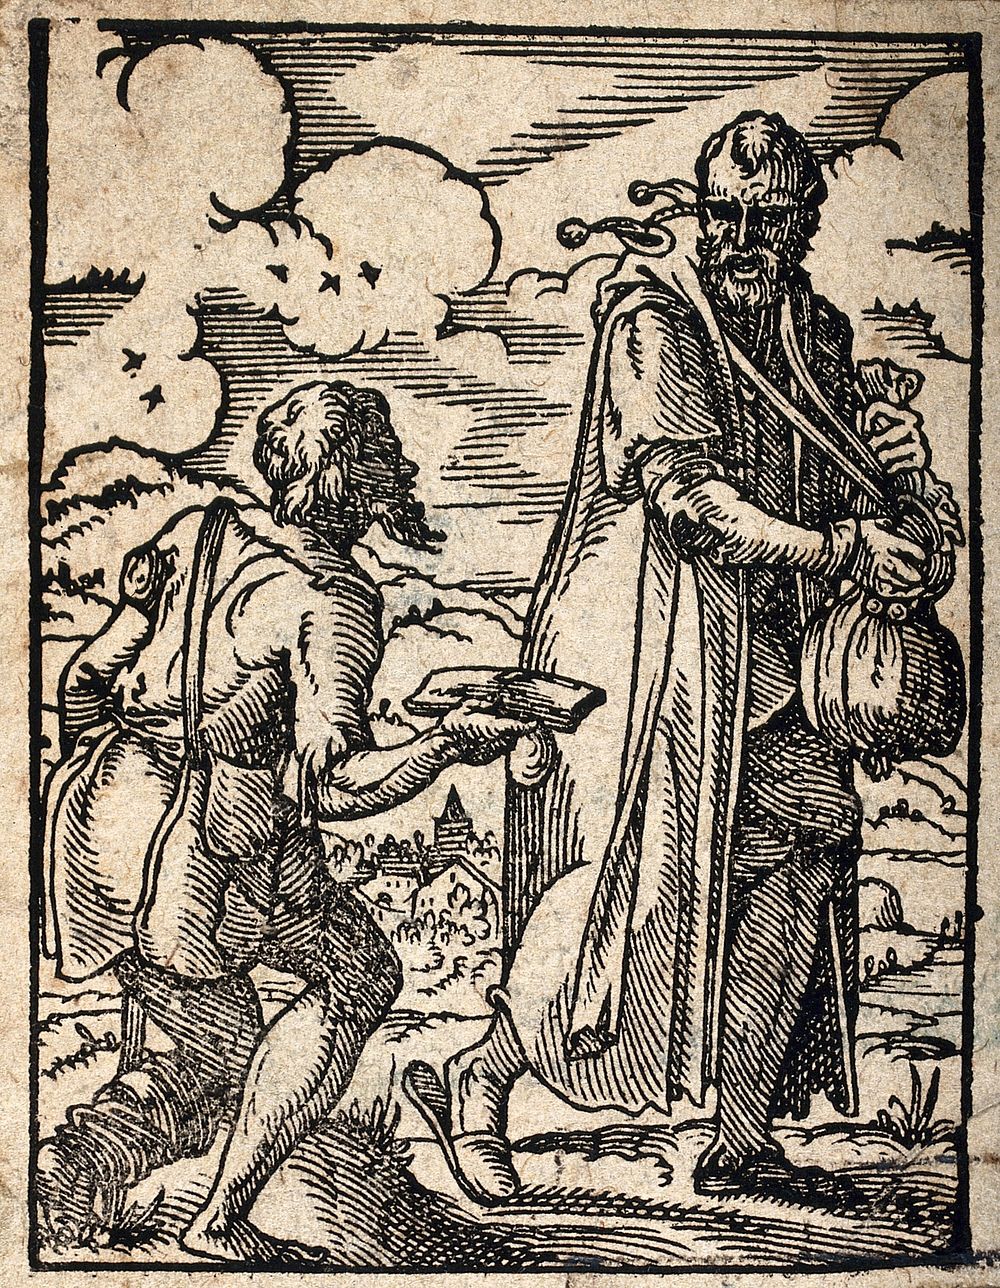 A miser and usurer holding a money-bag is accosted by a poor man on crutches. Woodcut by J. Amman, c. 1568.